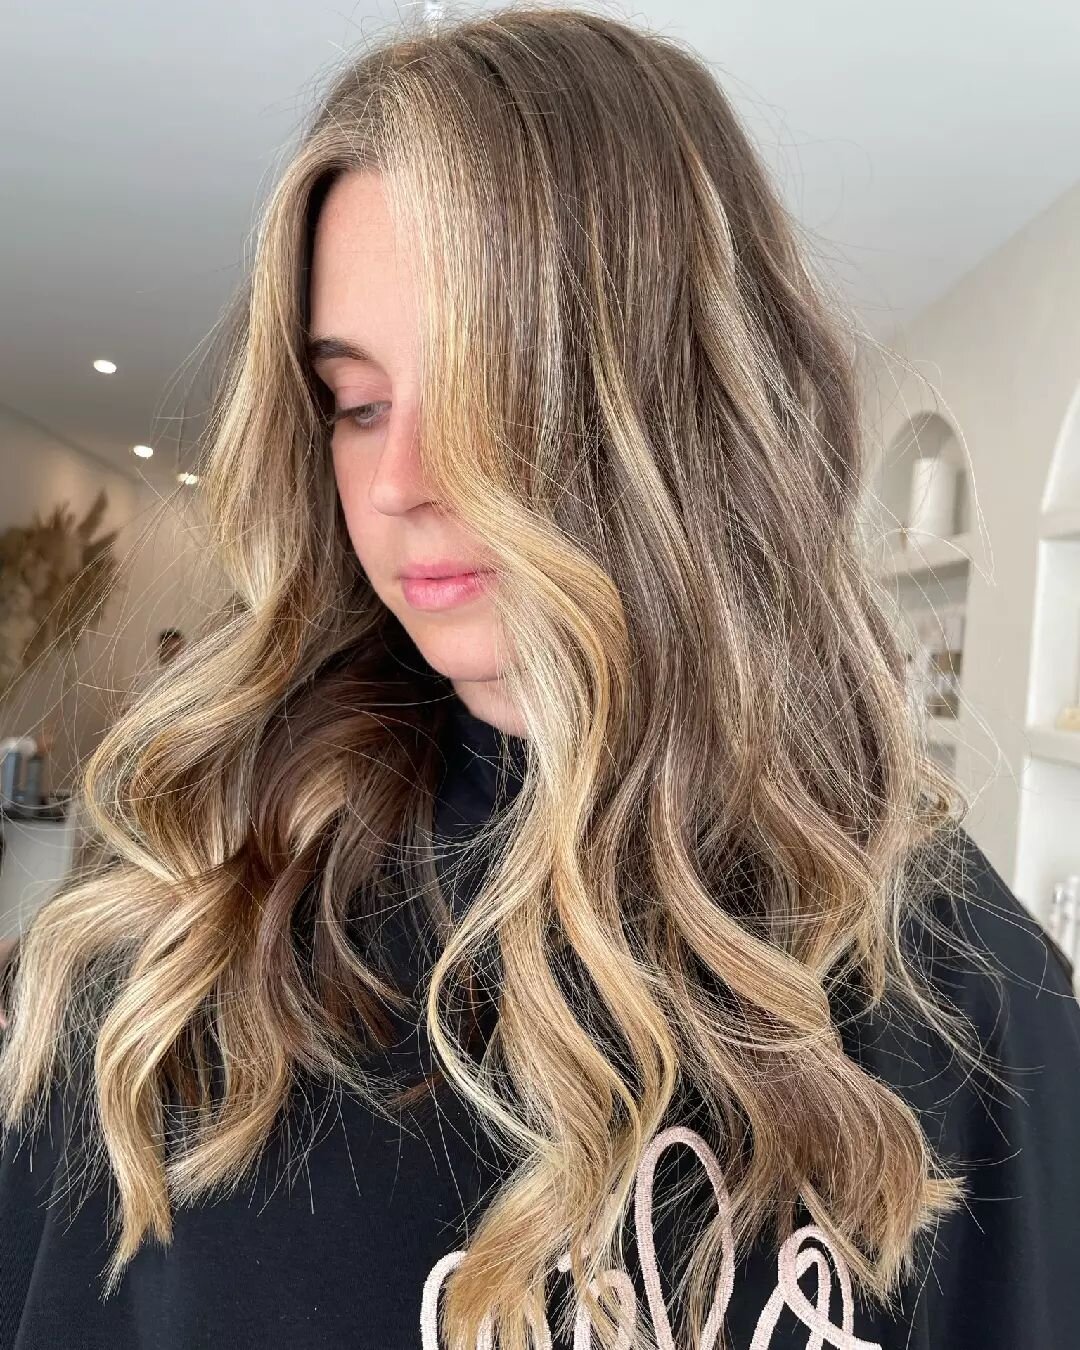 POPS &amp; CONTRAST 😍&nbsp;
​
One of the greatest advantages of balayage is how long it lasts. This freehand hair colouring technique gives a really blended, natural look with no harsh or obvious regrowth lines, lasting 3-4 months on average! We are